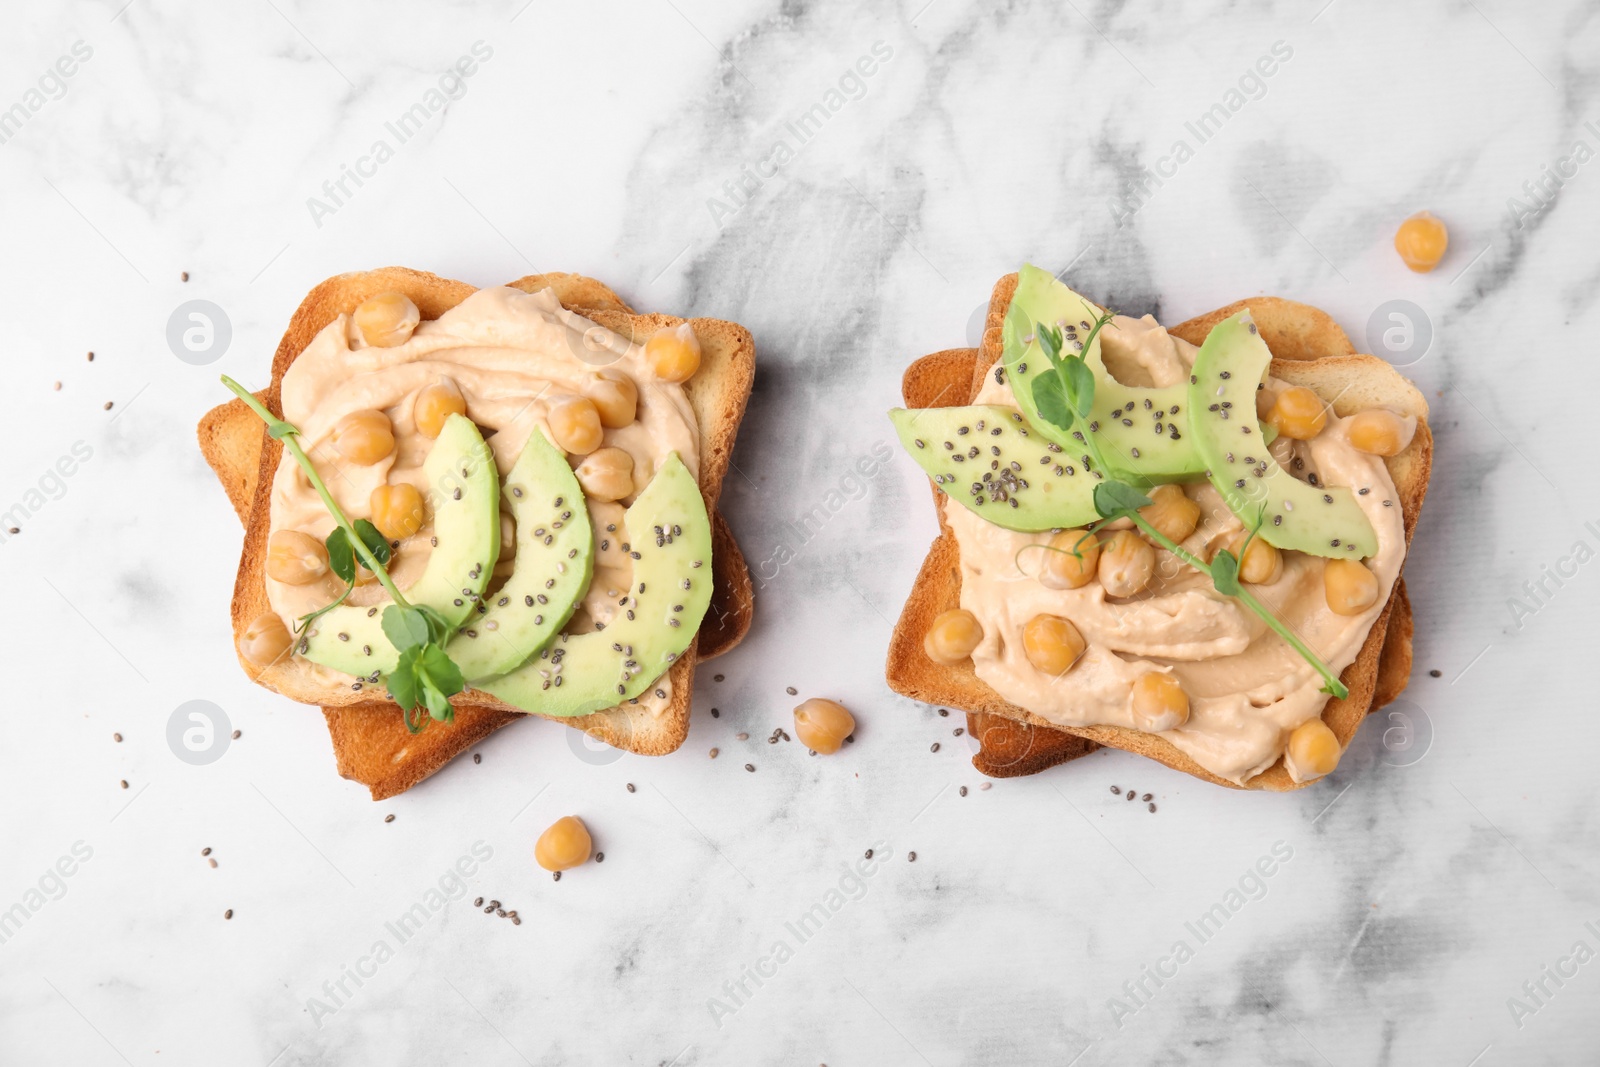 Photo of Delicious sandwiches with hummus, avocado and chickpeas on white marble table, flat lay